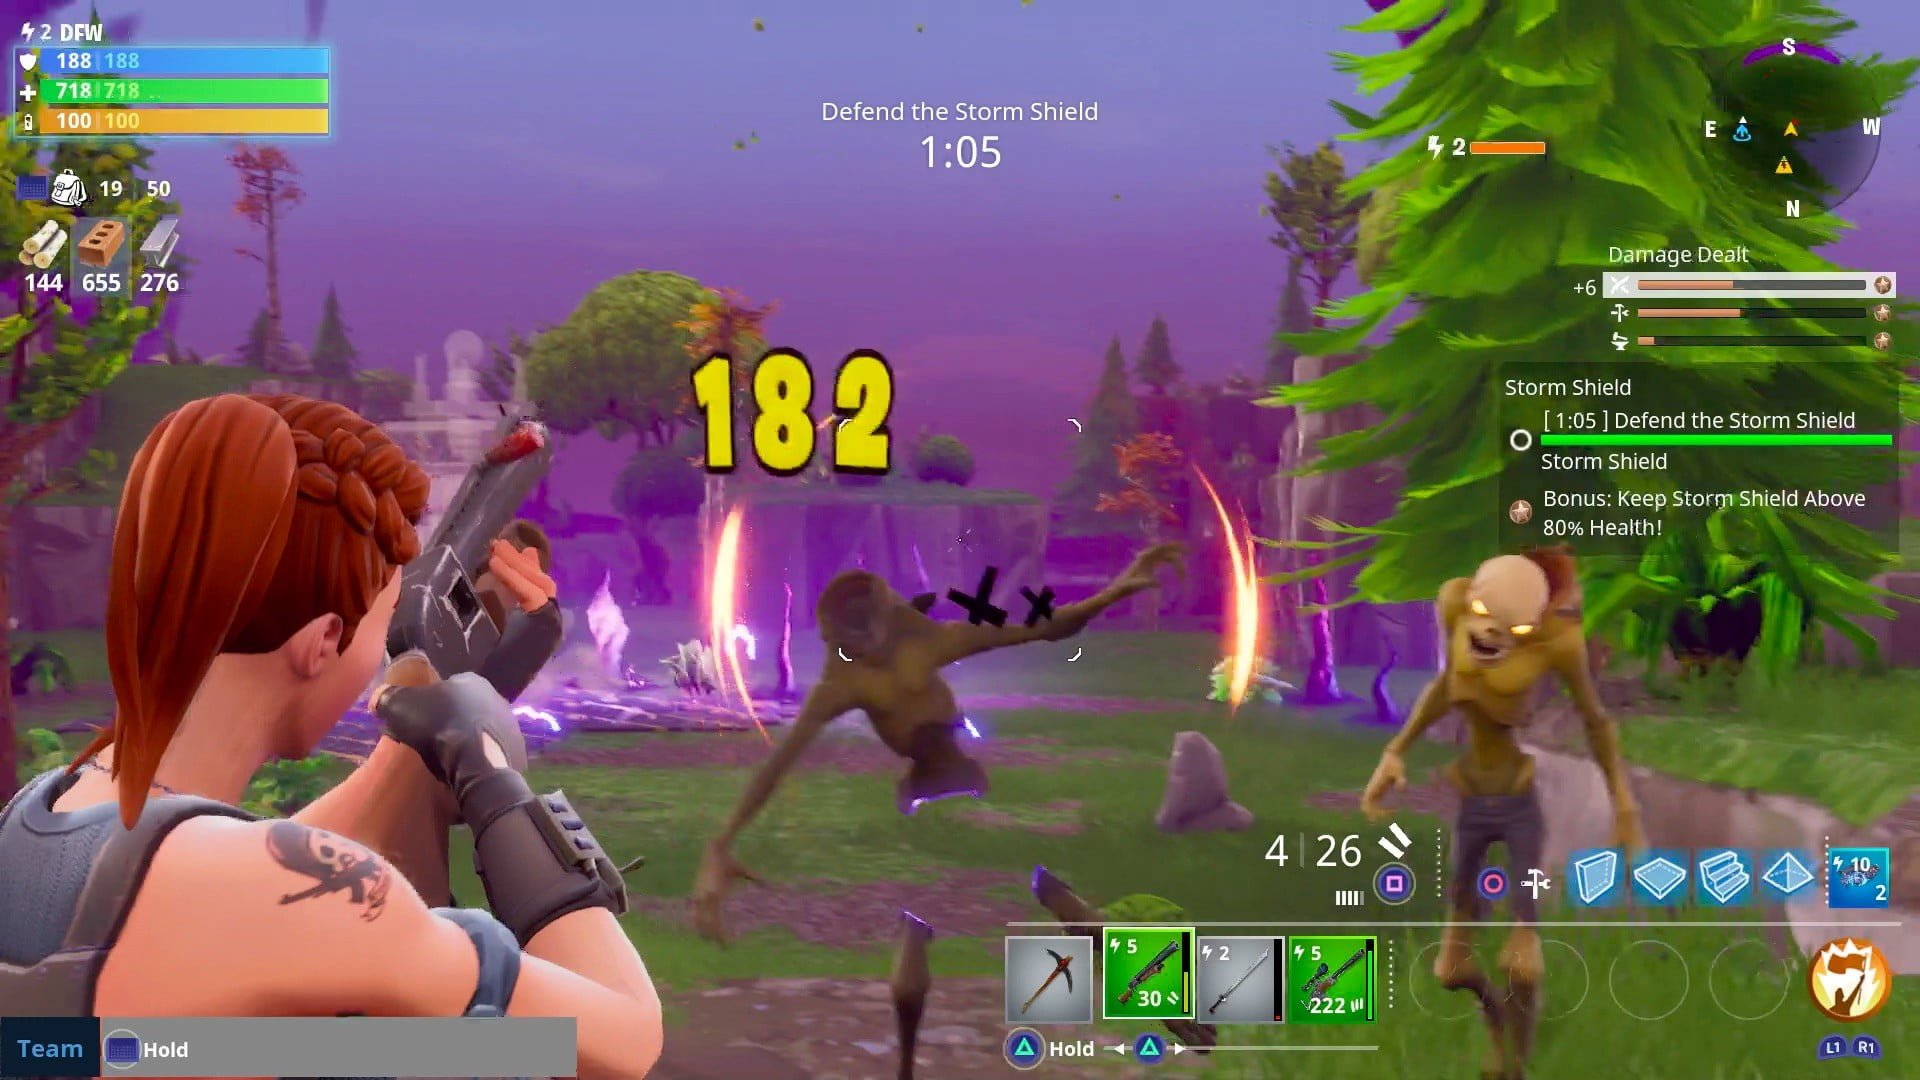 Fortnite - More than 78.3 million Players served in August